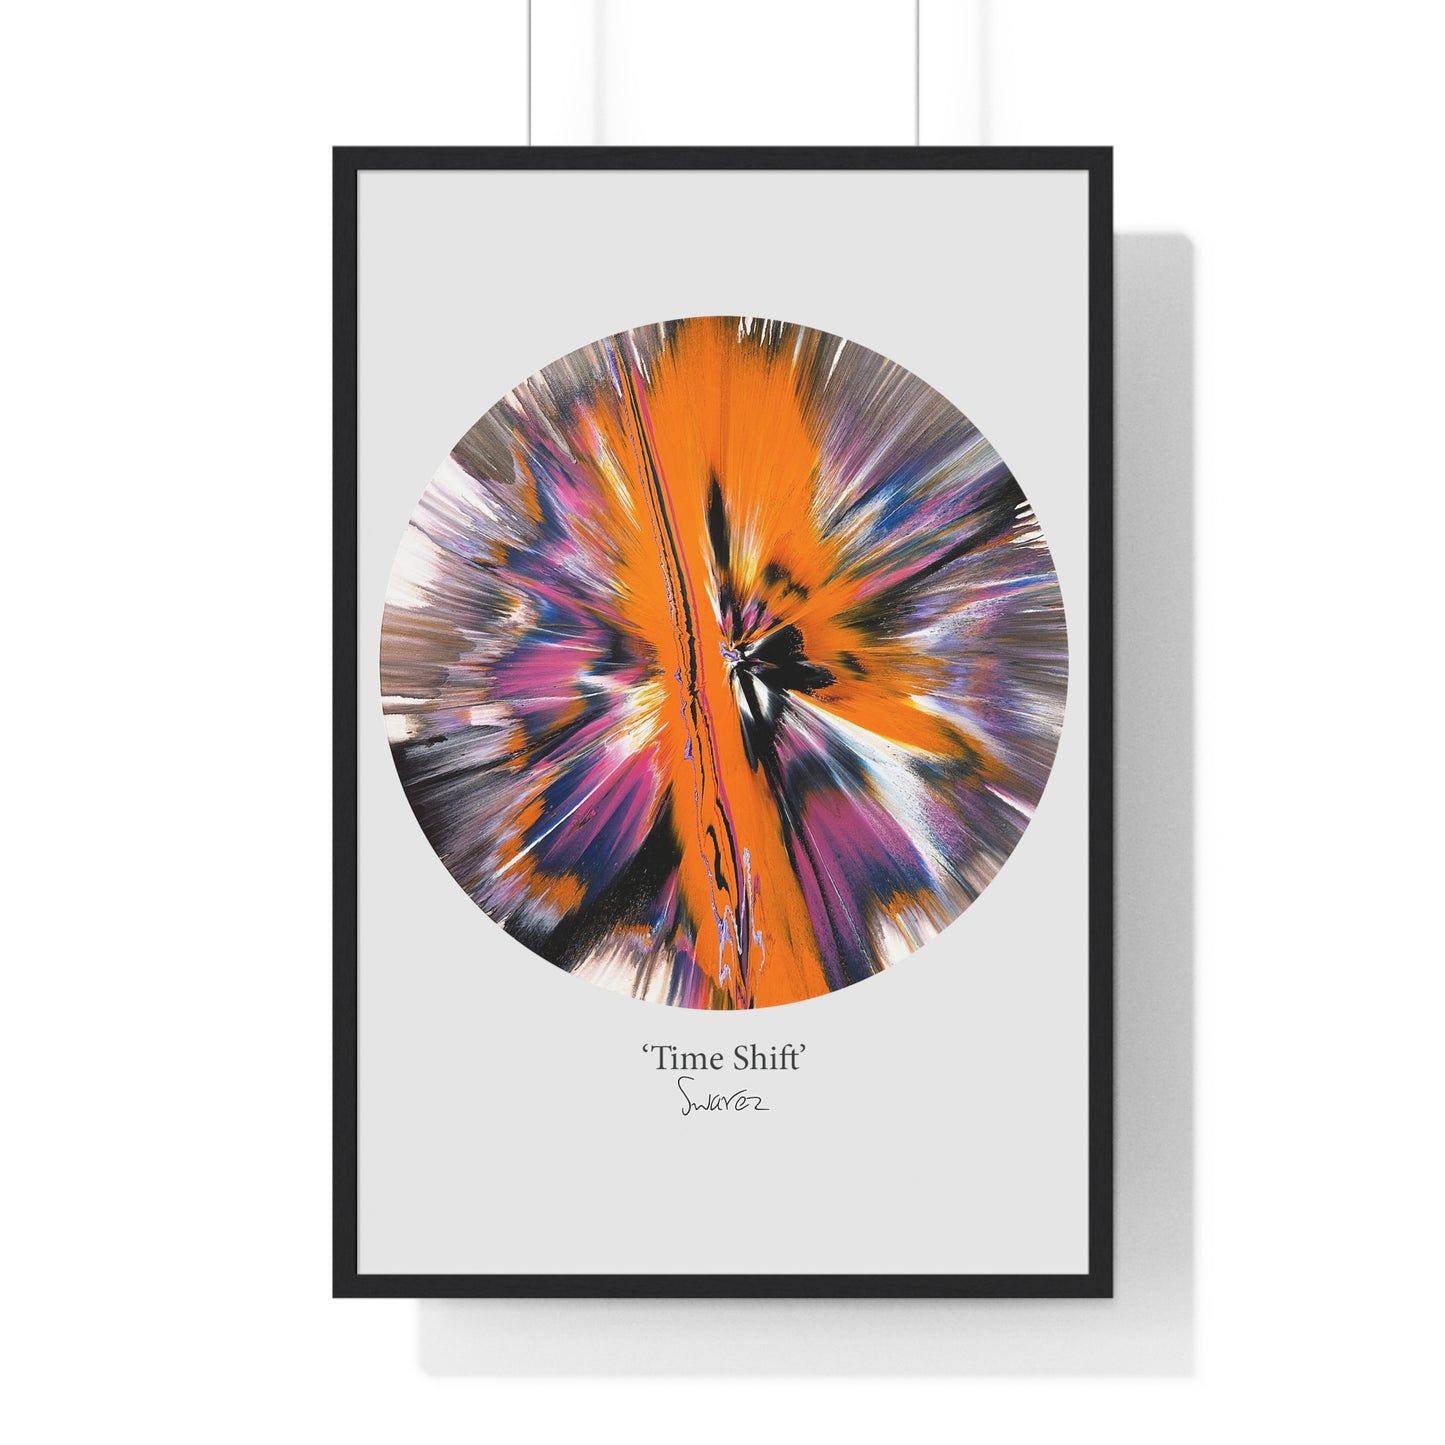 'Time Shift' by Swarez - Limited Edition Framed Vertical Poster Print